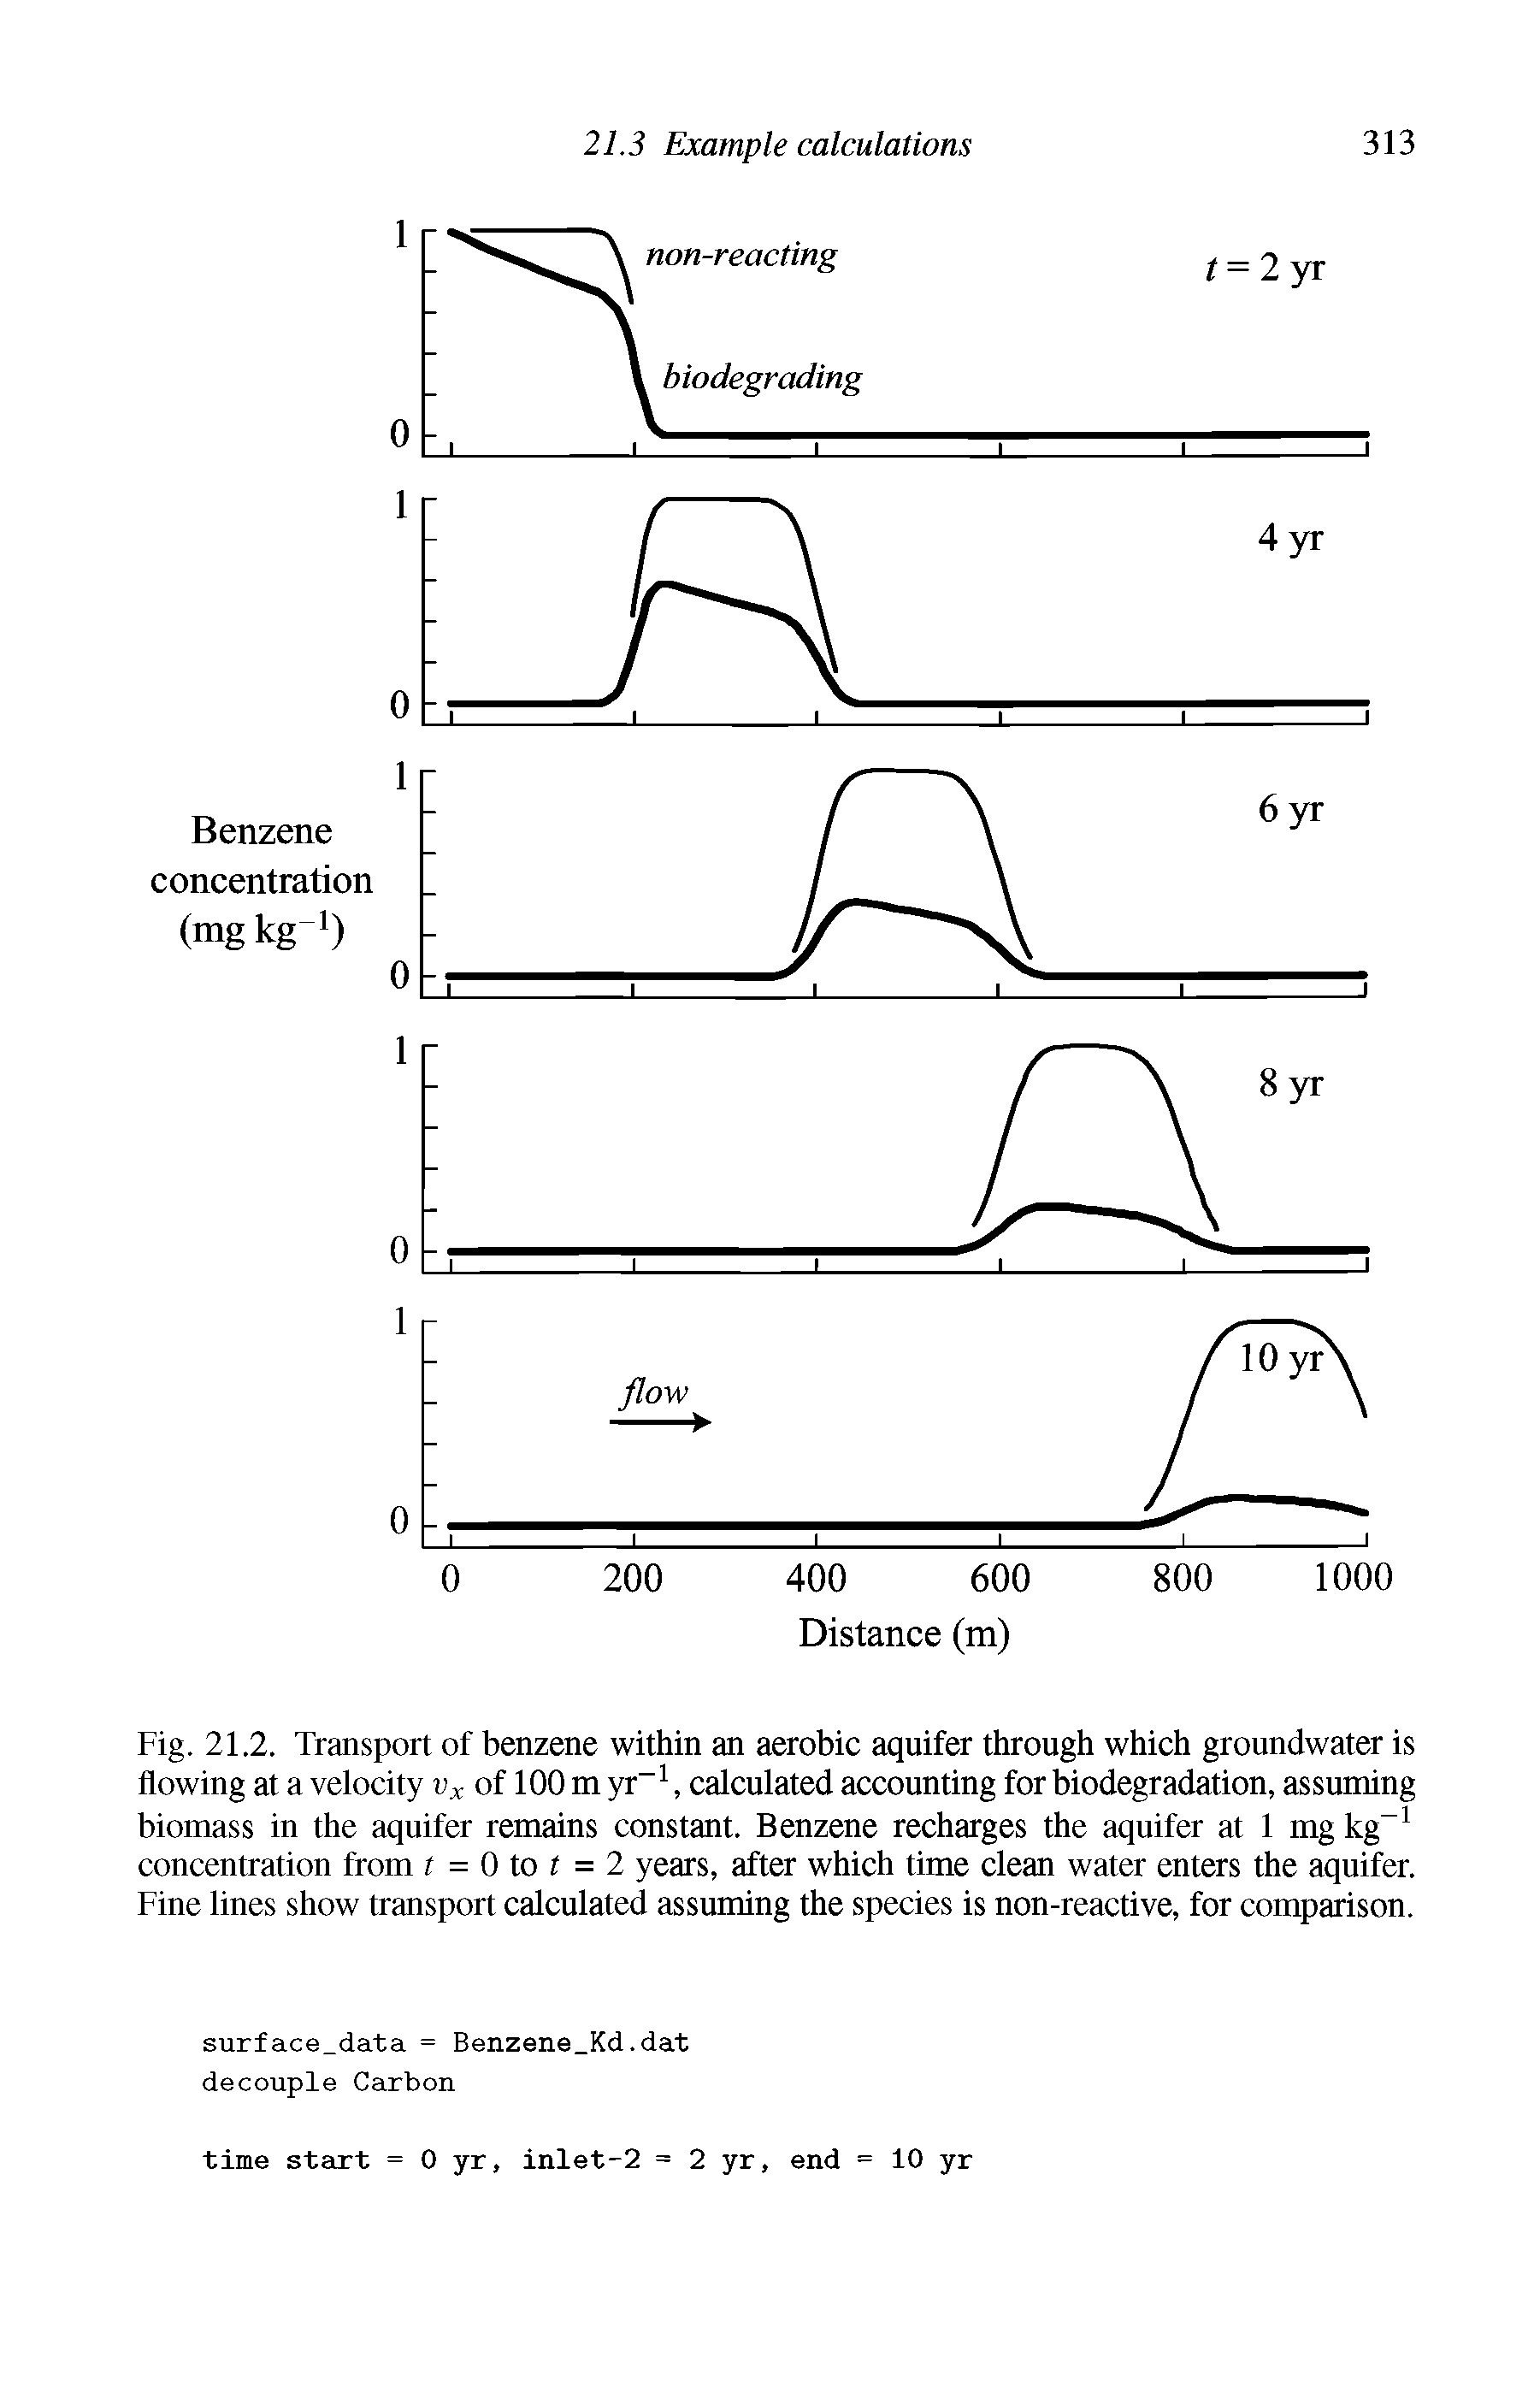 Fig. 21.2. Transport of benzene within an aerobic aquifer through which groundwater is flowing at a velocity vx of 100 m yr-1, calculated accounting for biodegradation, assuming biomass in the aquifer remains constant. Benzene recharges the aquifer at 1 mg kg-1 concentration from t = 0 to t = 2 years, after which time clean water enters the aquifer. Fine lines show transport calculated assuming the species is non-reactive, for comparison.